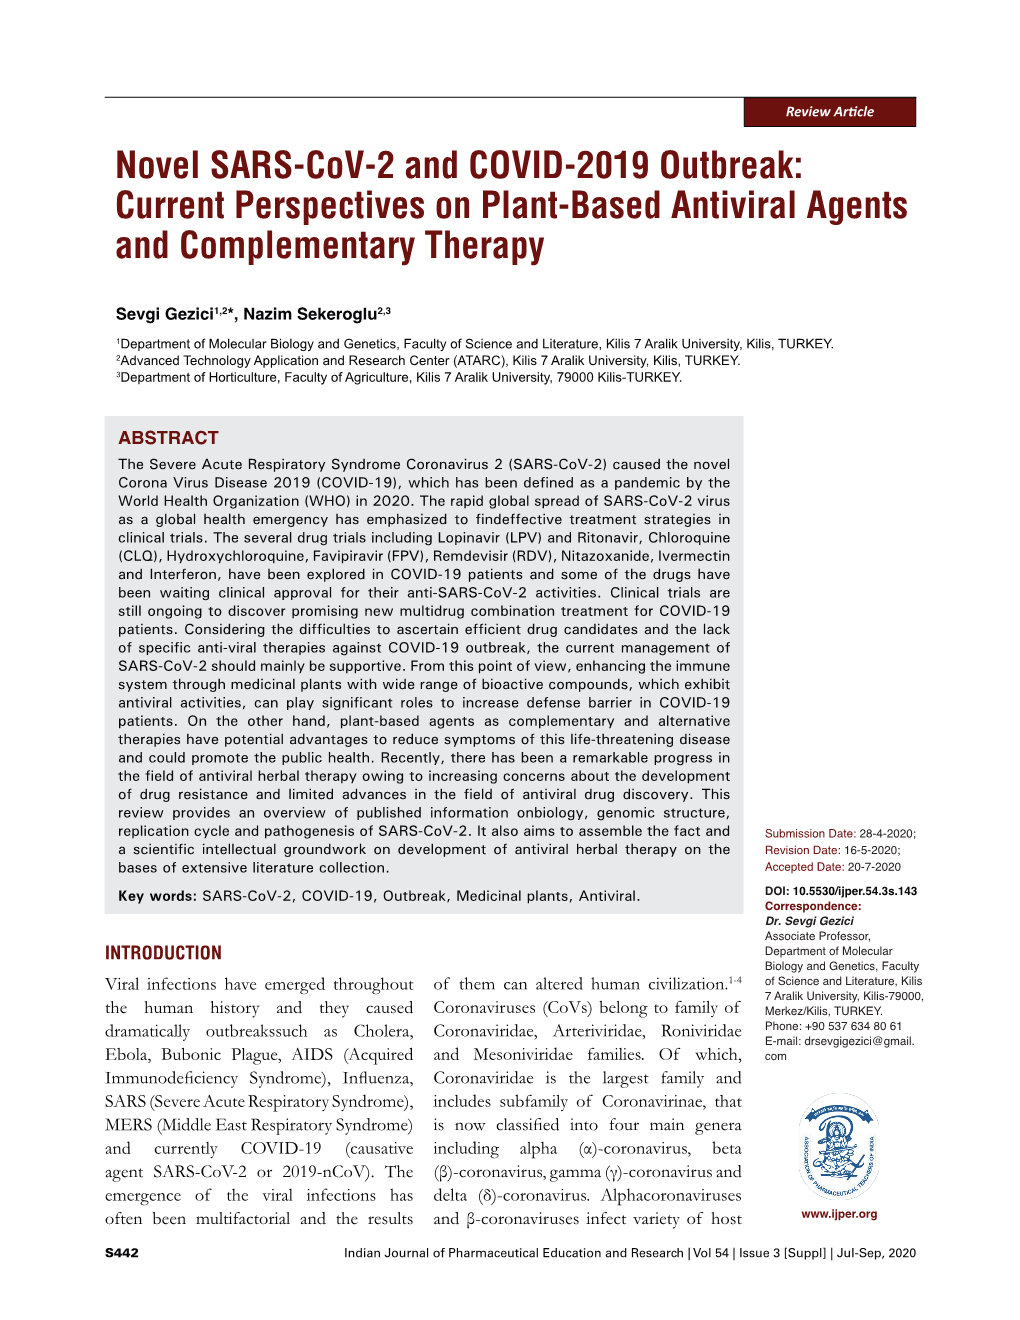 Novel SARS-Cov-2 and COVID-2019 Outbreak: Current Perspectives on Plant-Based Antiviral Agents and Complementary Therapy